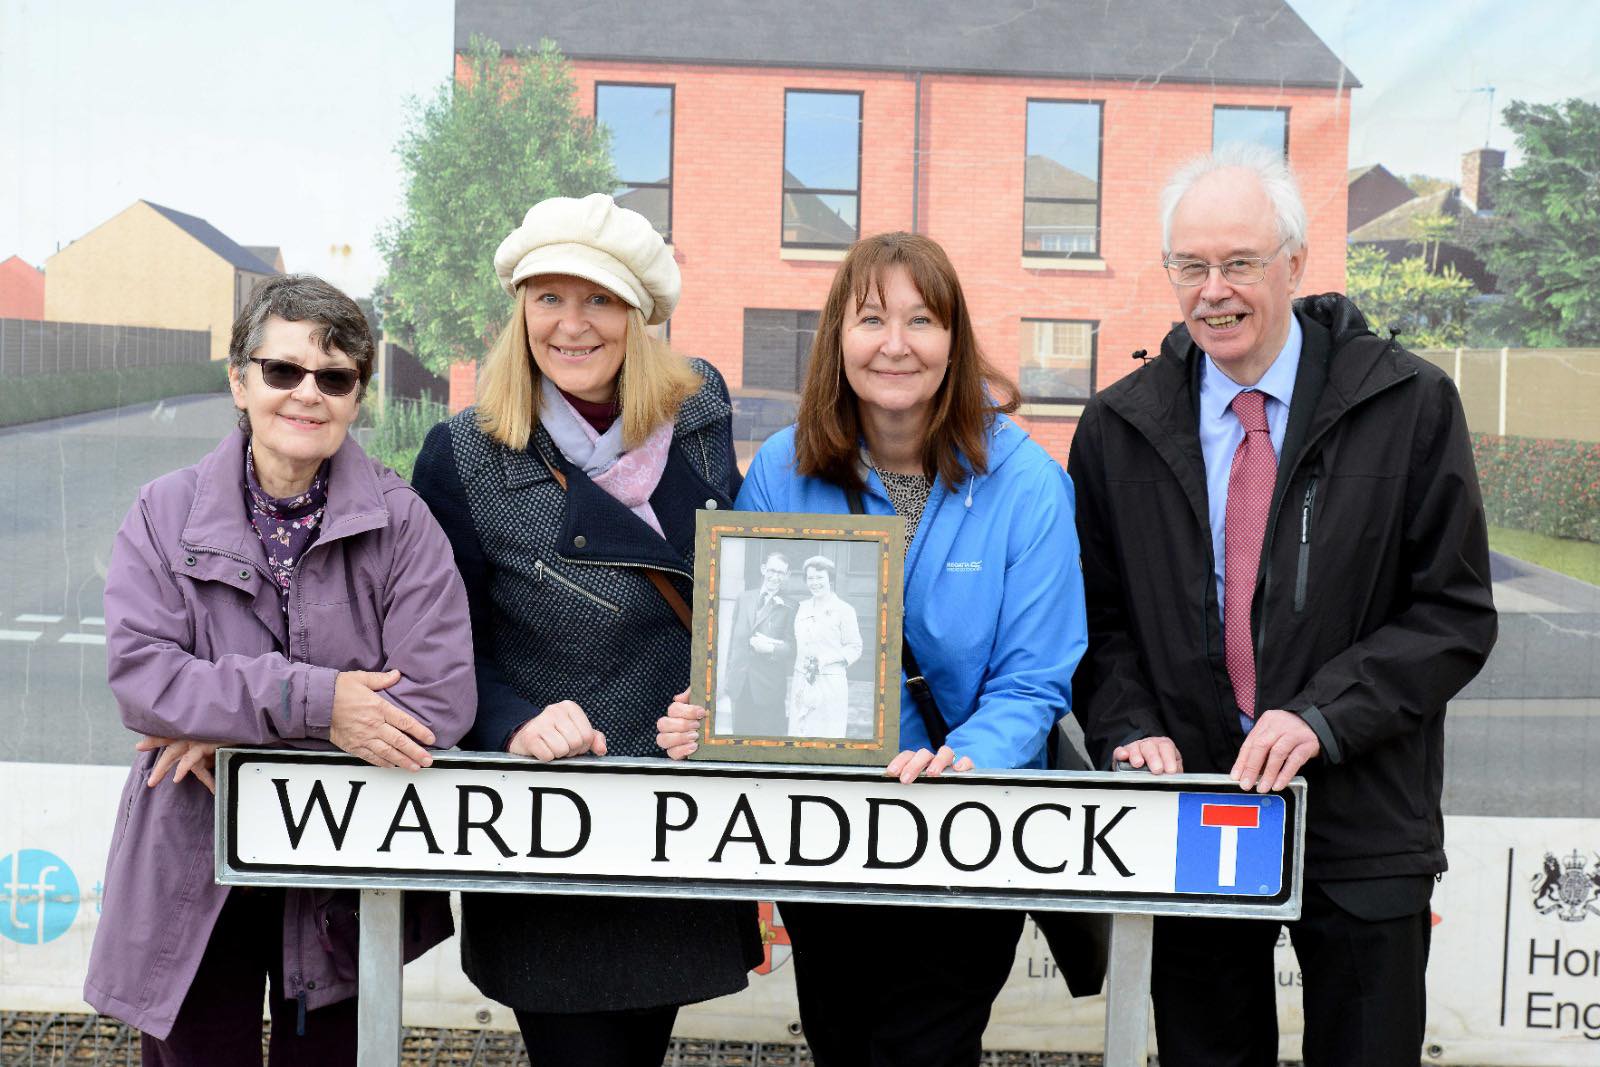 'Ward' sisters and Cllr Nannestad stood with road sign